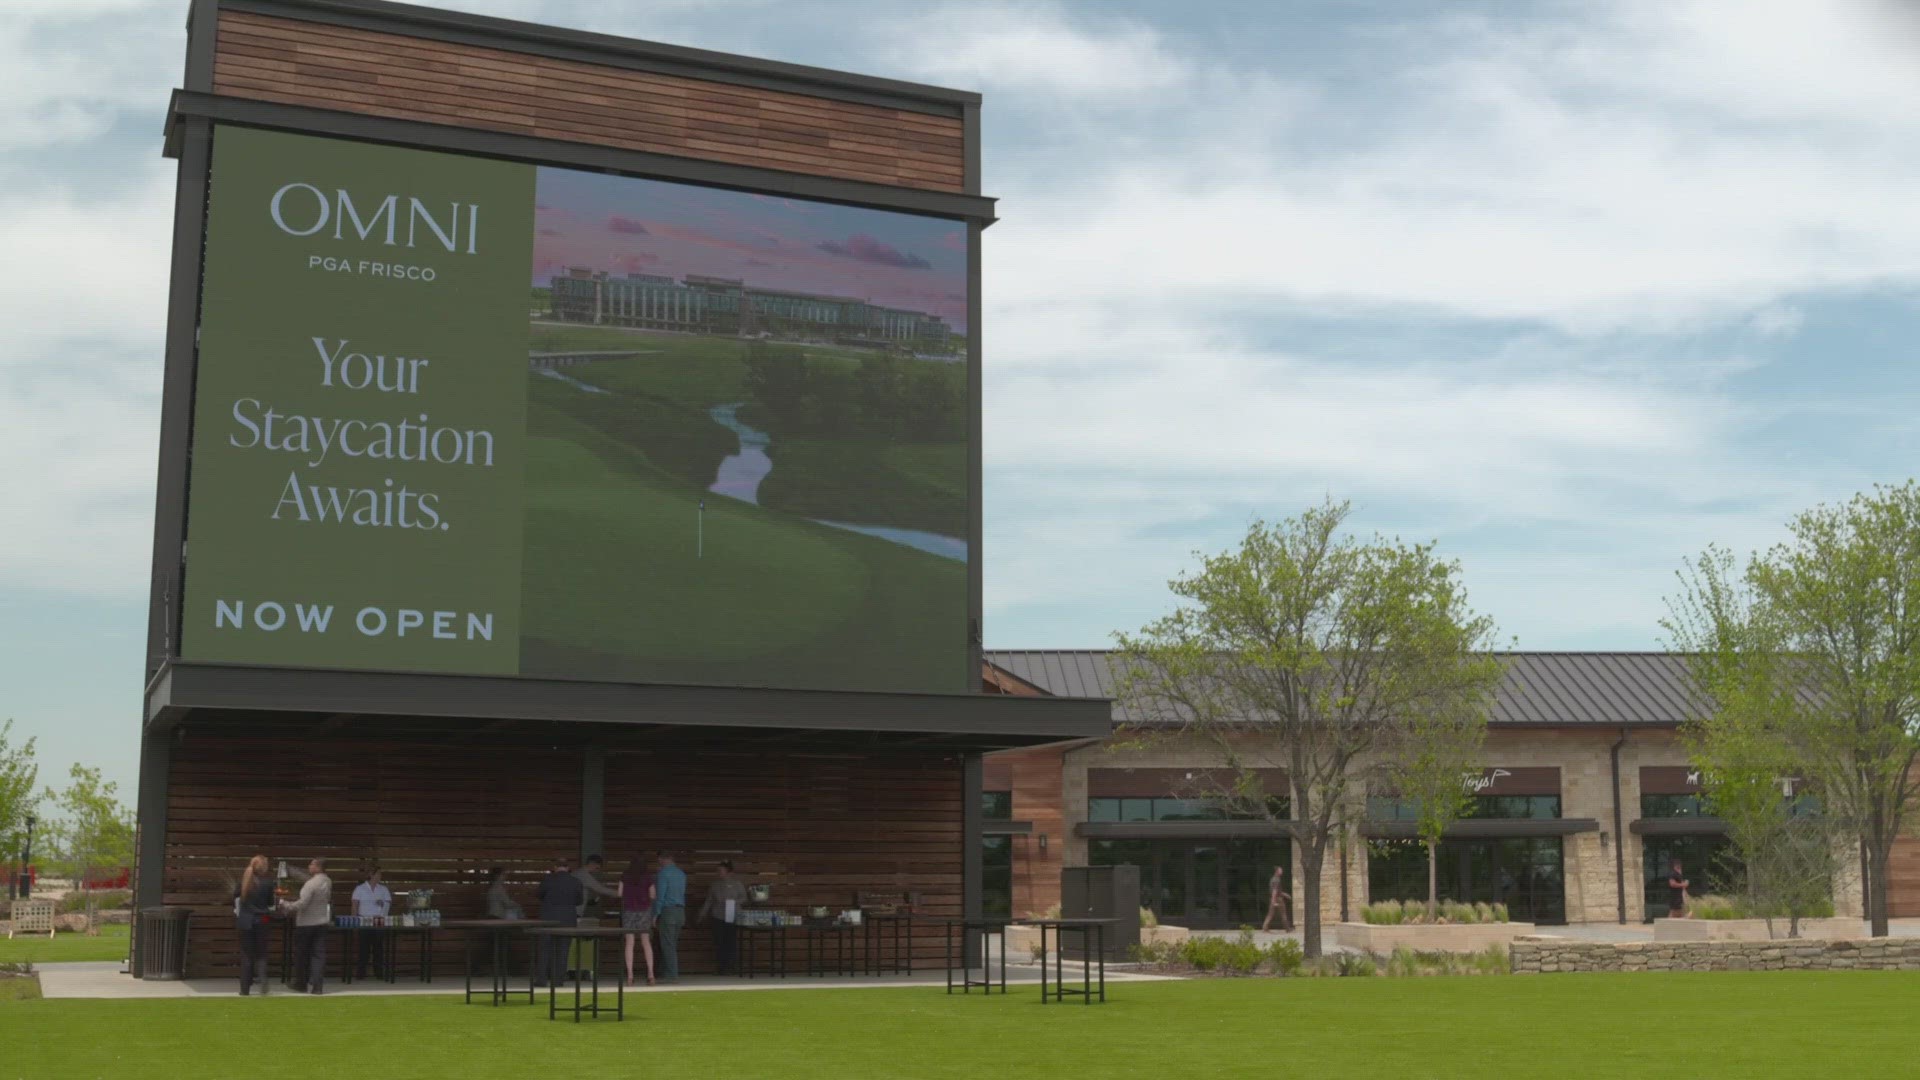 After years of planning and construction, the Omni PGA Frisco Resort is open for business.